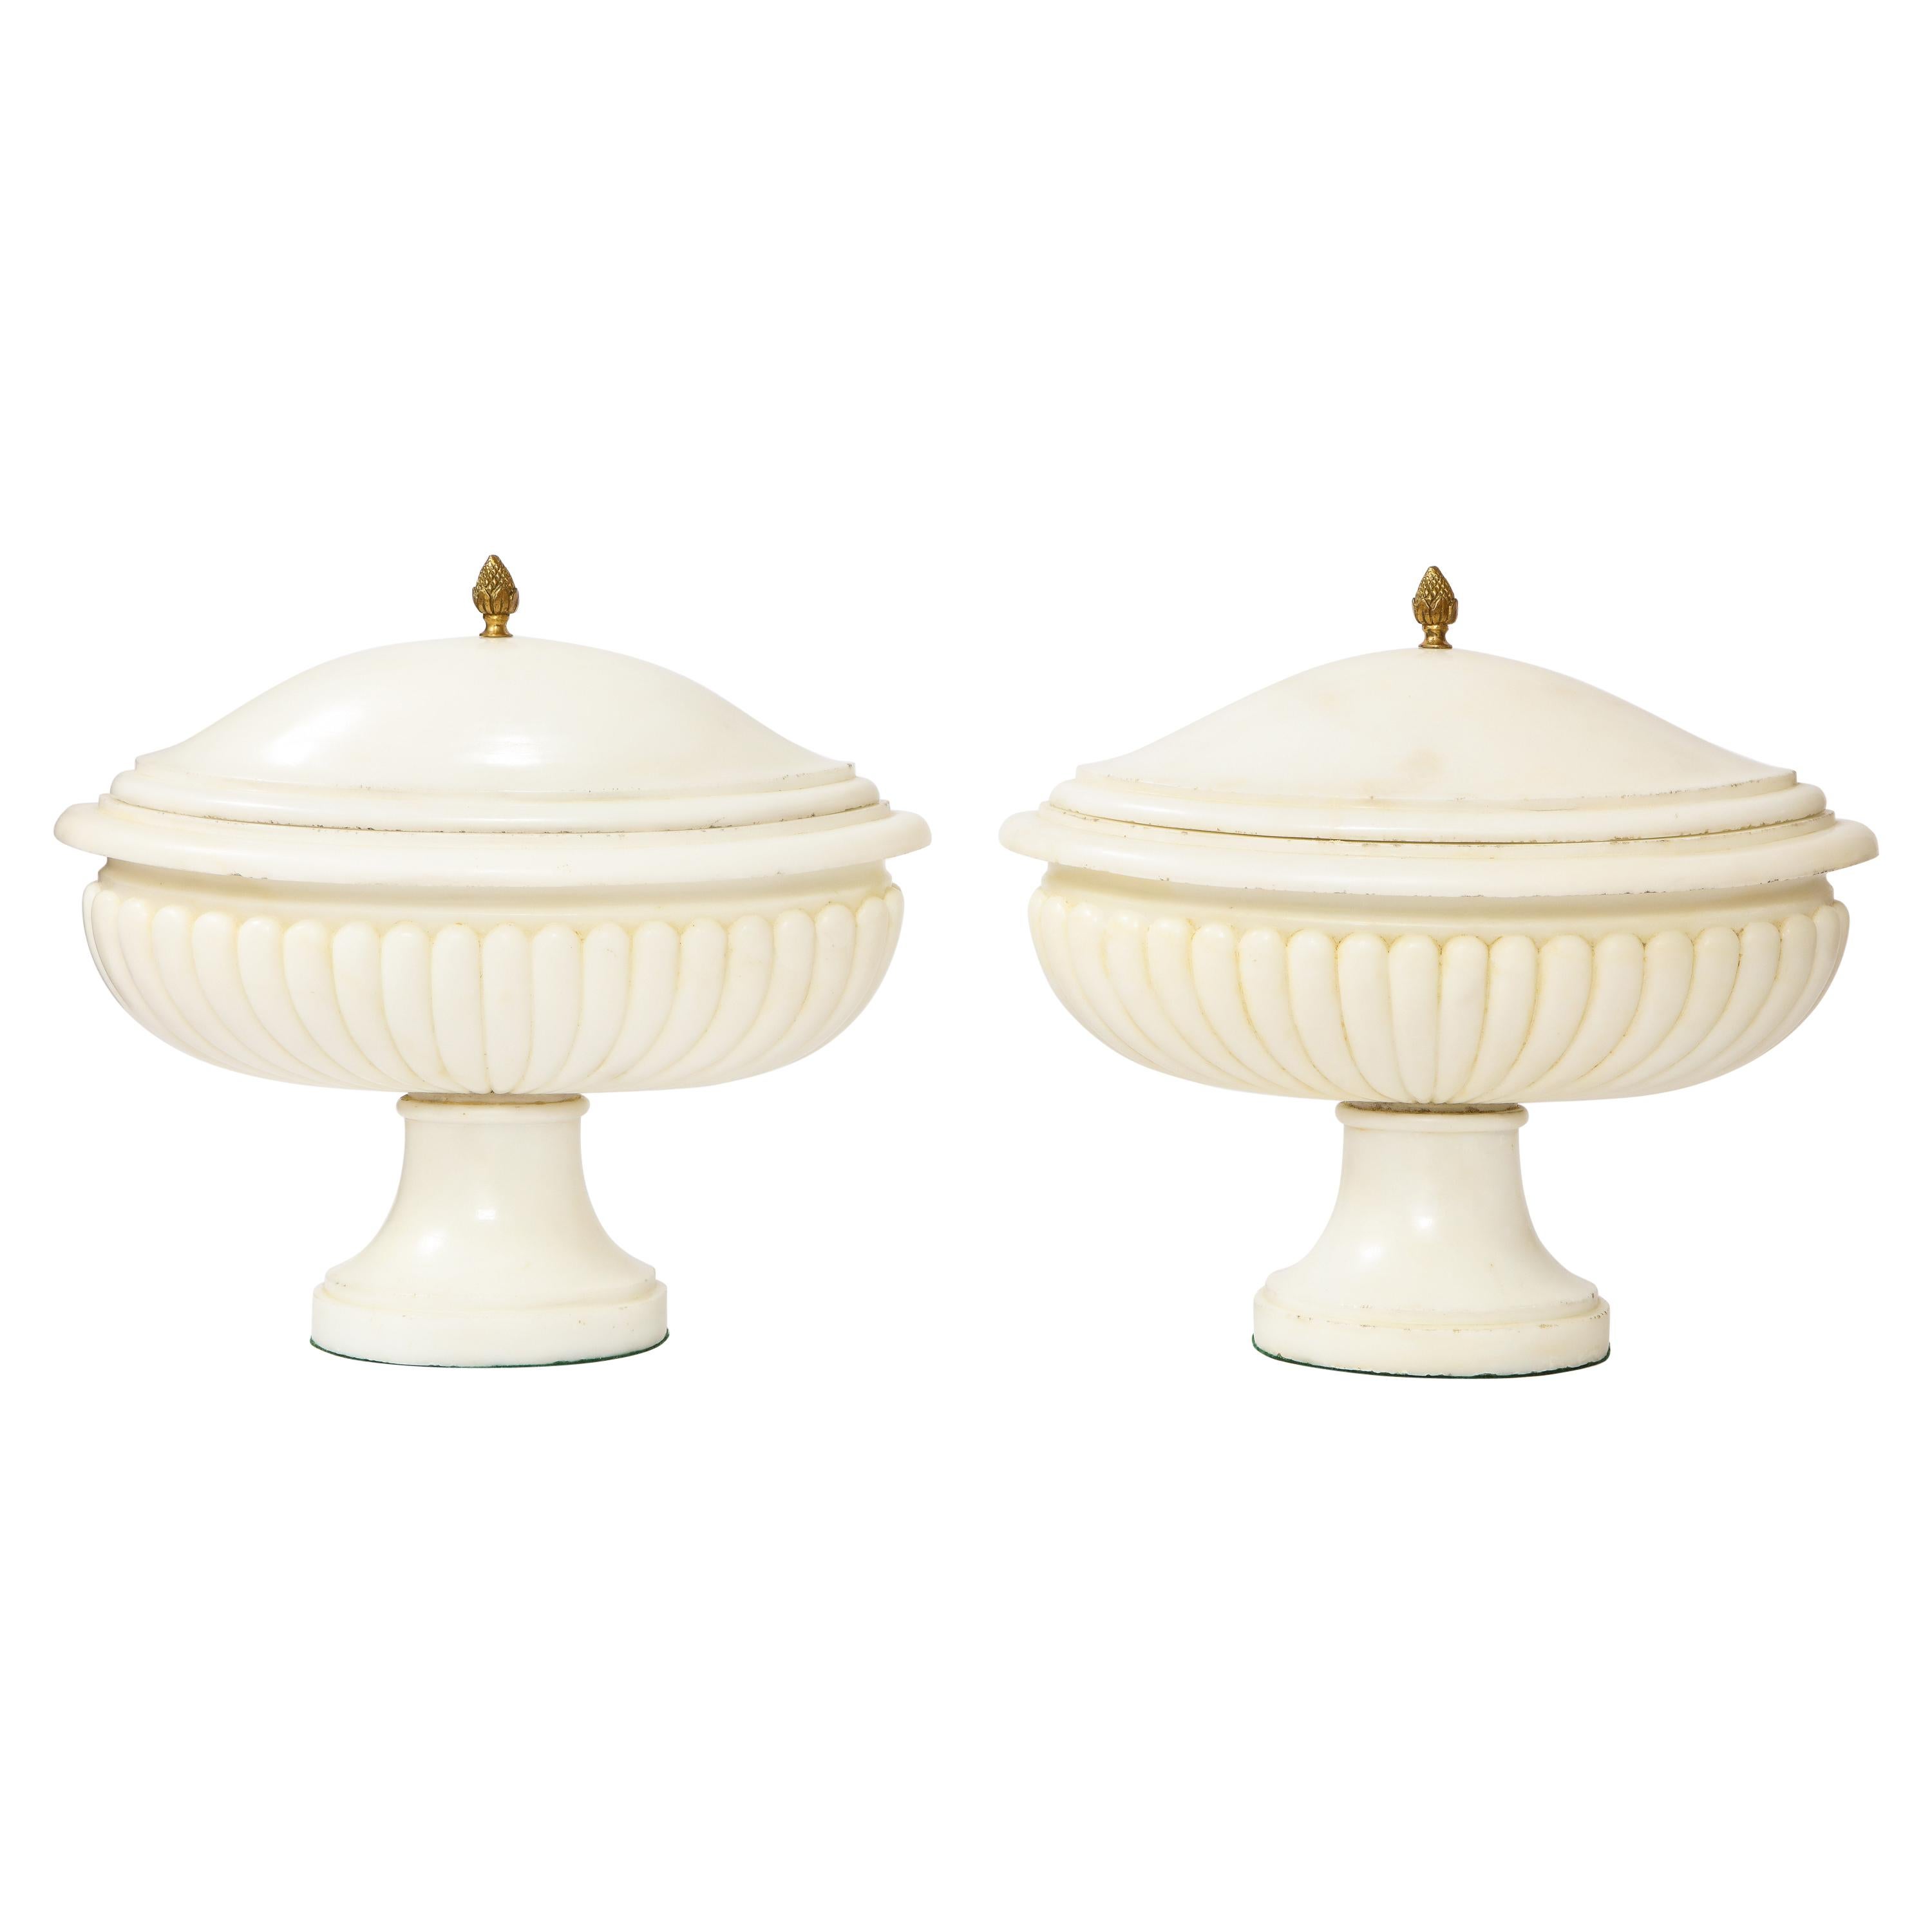 Pair of Italian Grand-Tour Neoclassical Hand-Carved Carrara Marble Covered Bowls